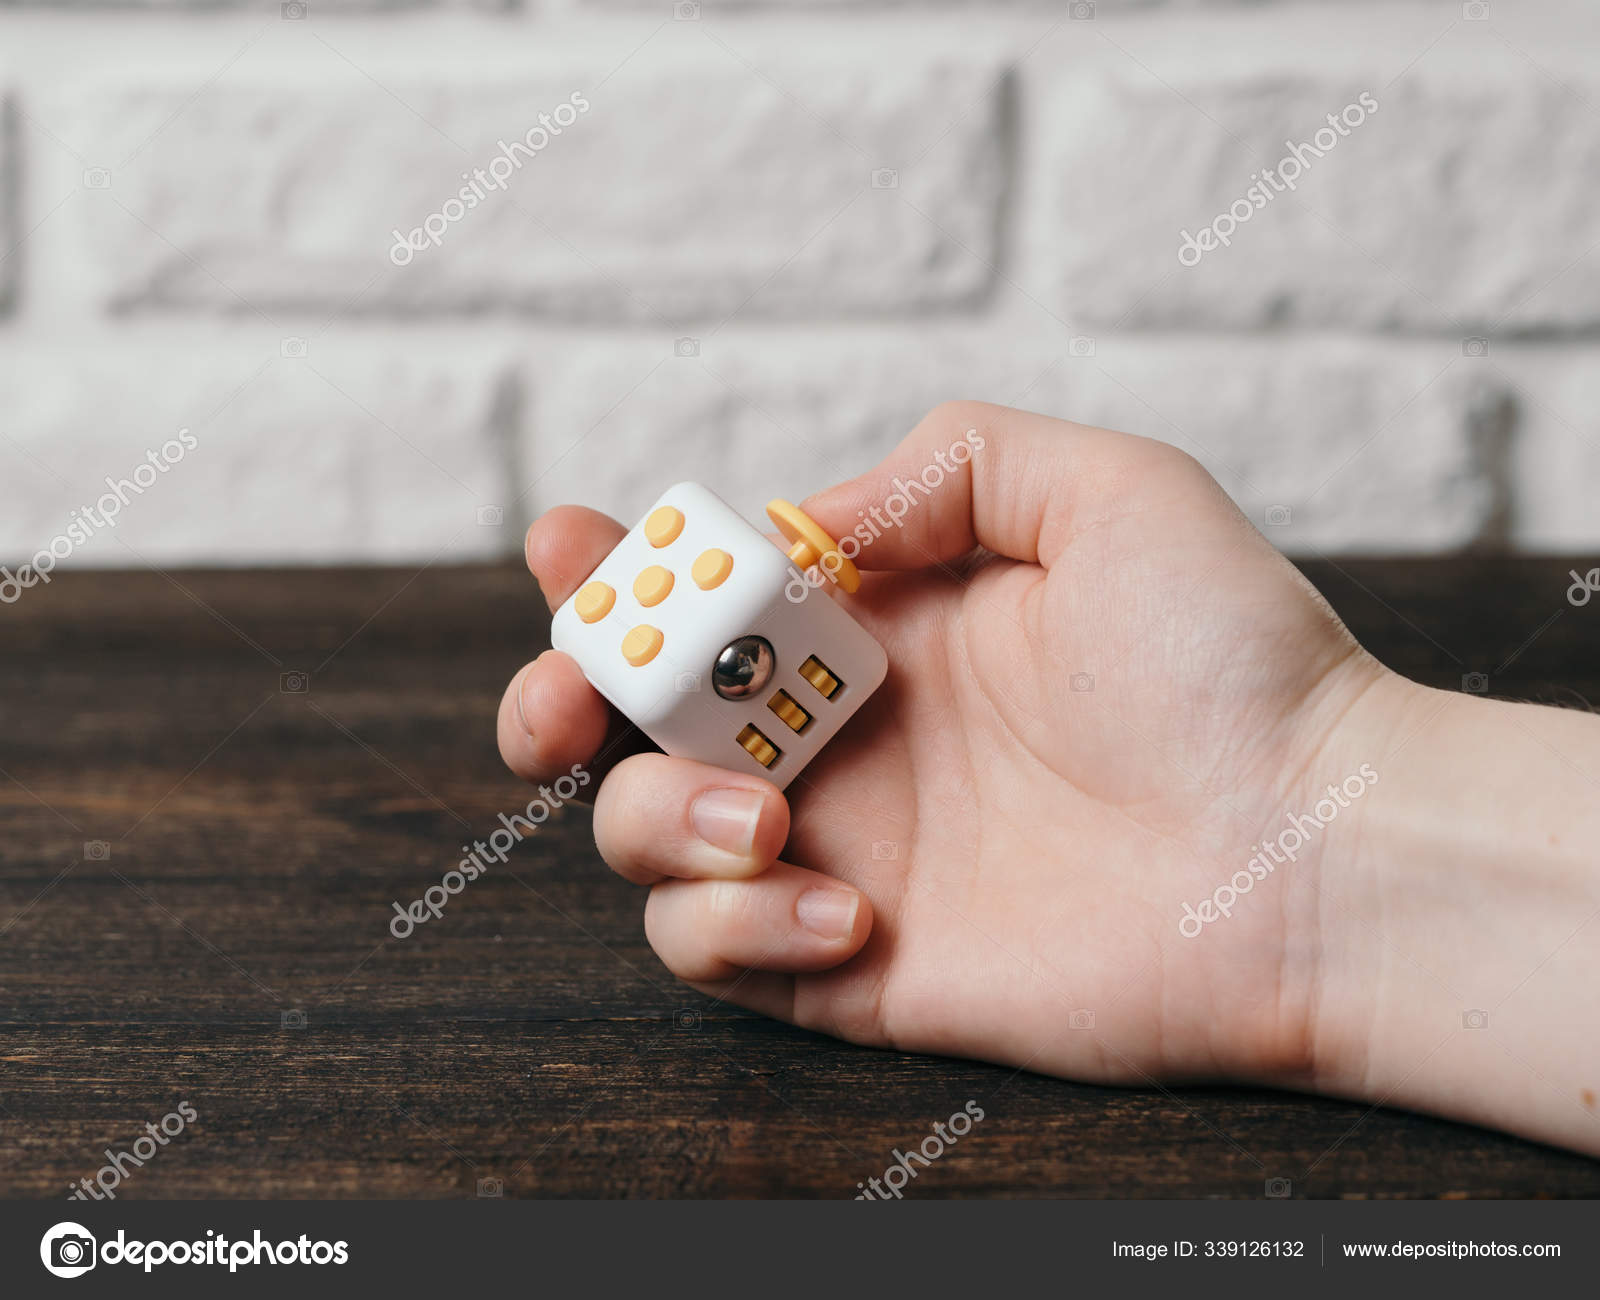 Fidget Cube Stress Reliever Hand Brown Wooden Background Fingers Antistress  Stock Photo by ©PantherMediaSeller 339126132